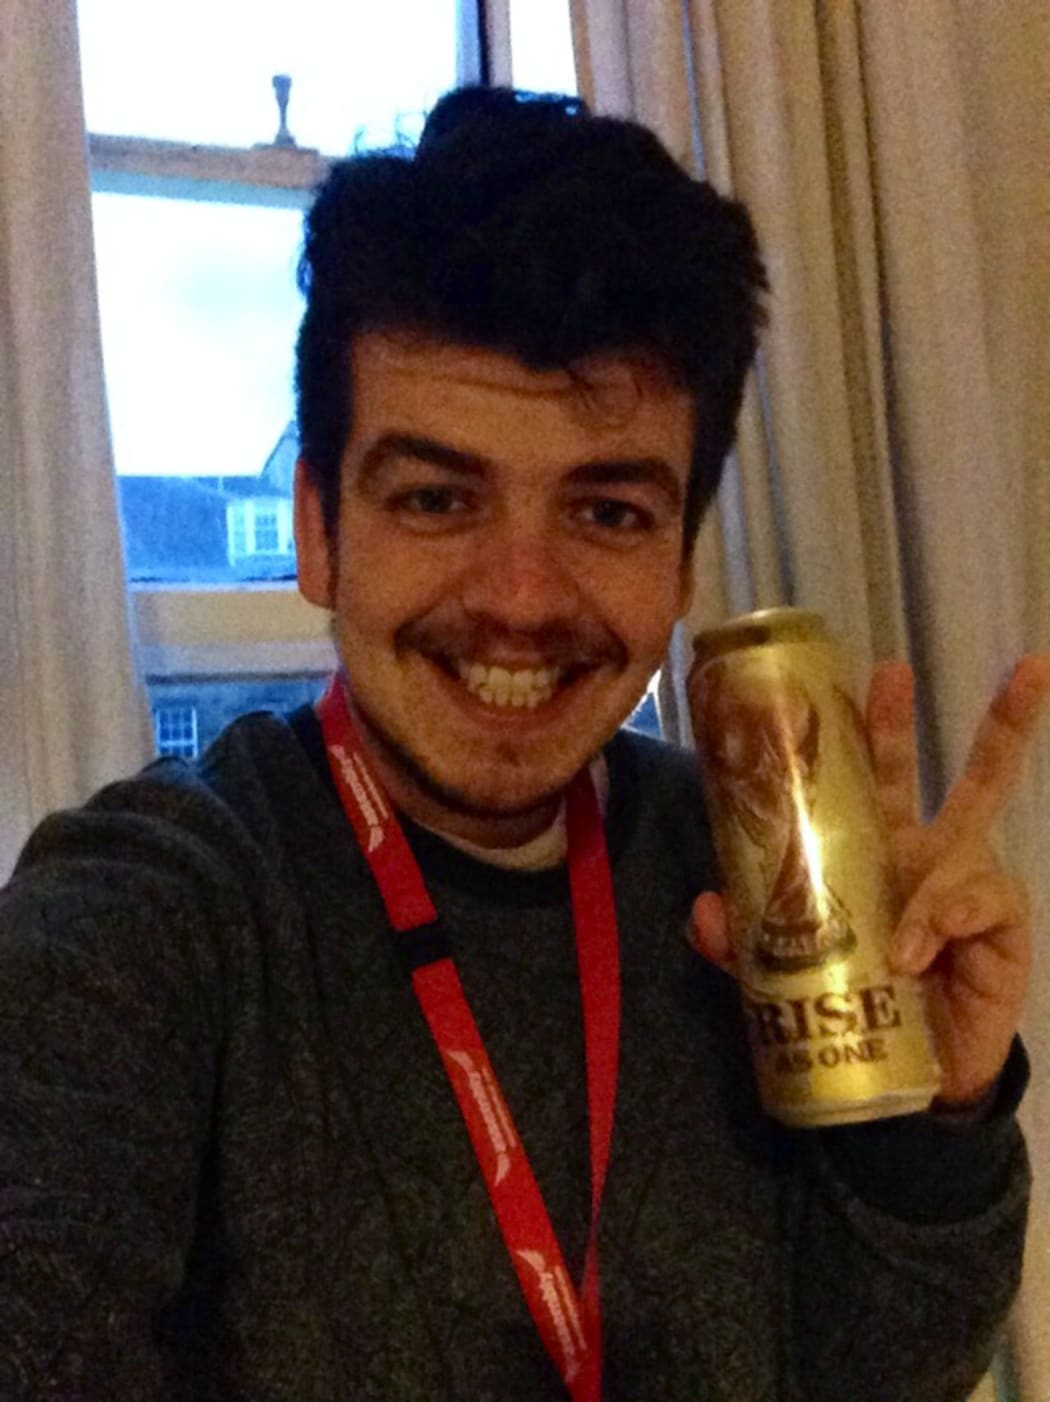 A picture of Joseph Moore with a World Cup commemorative beer